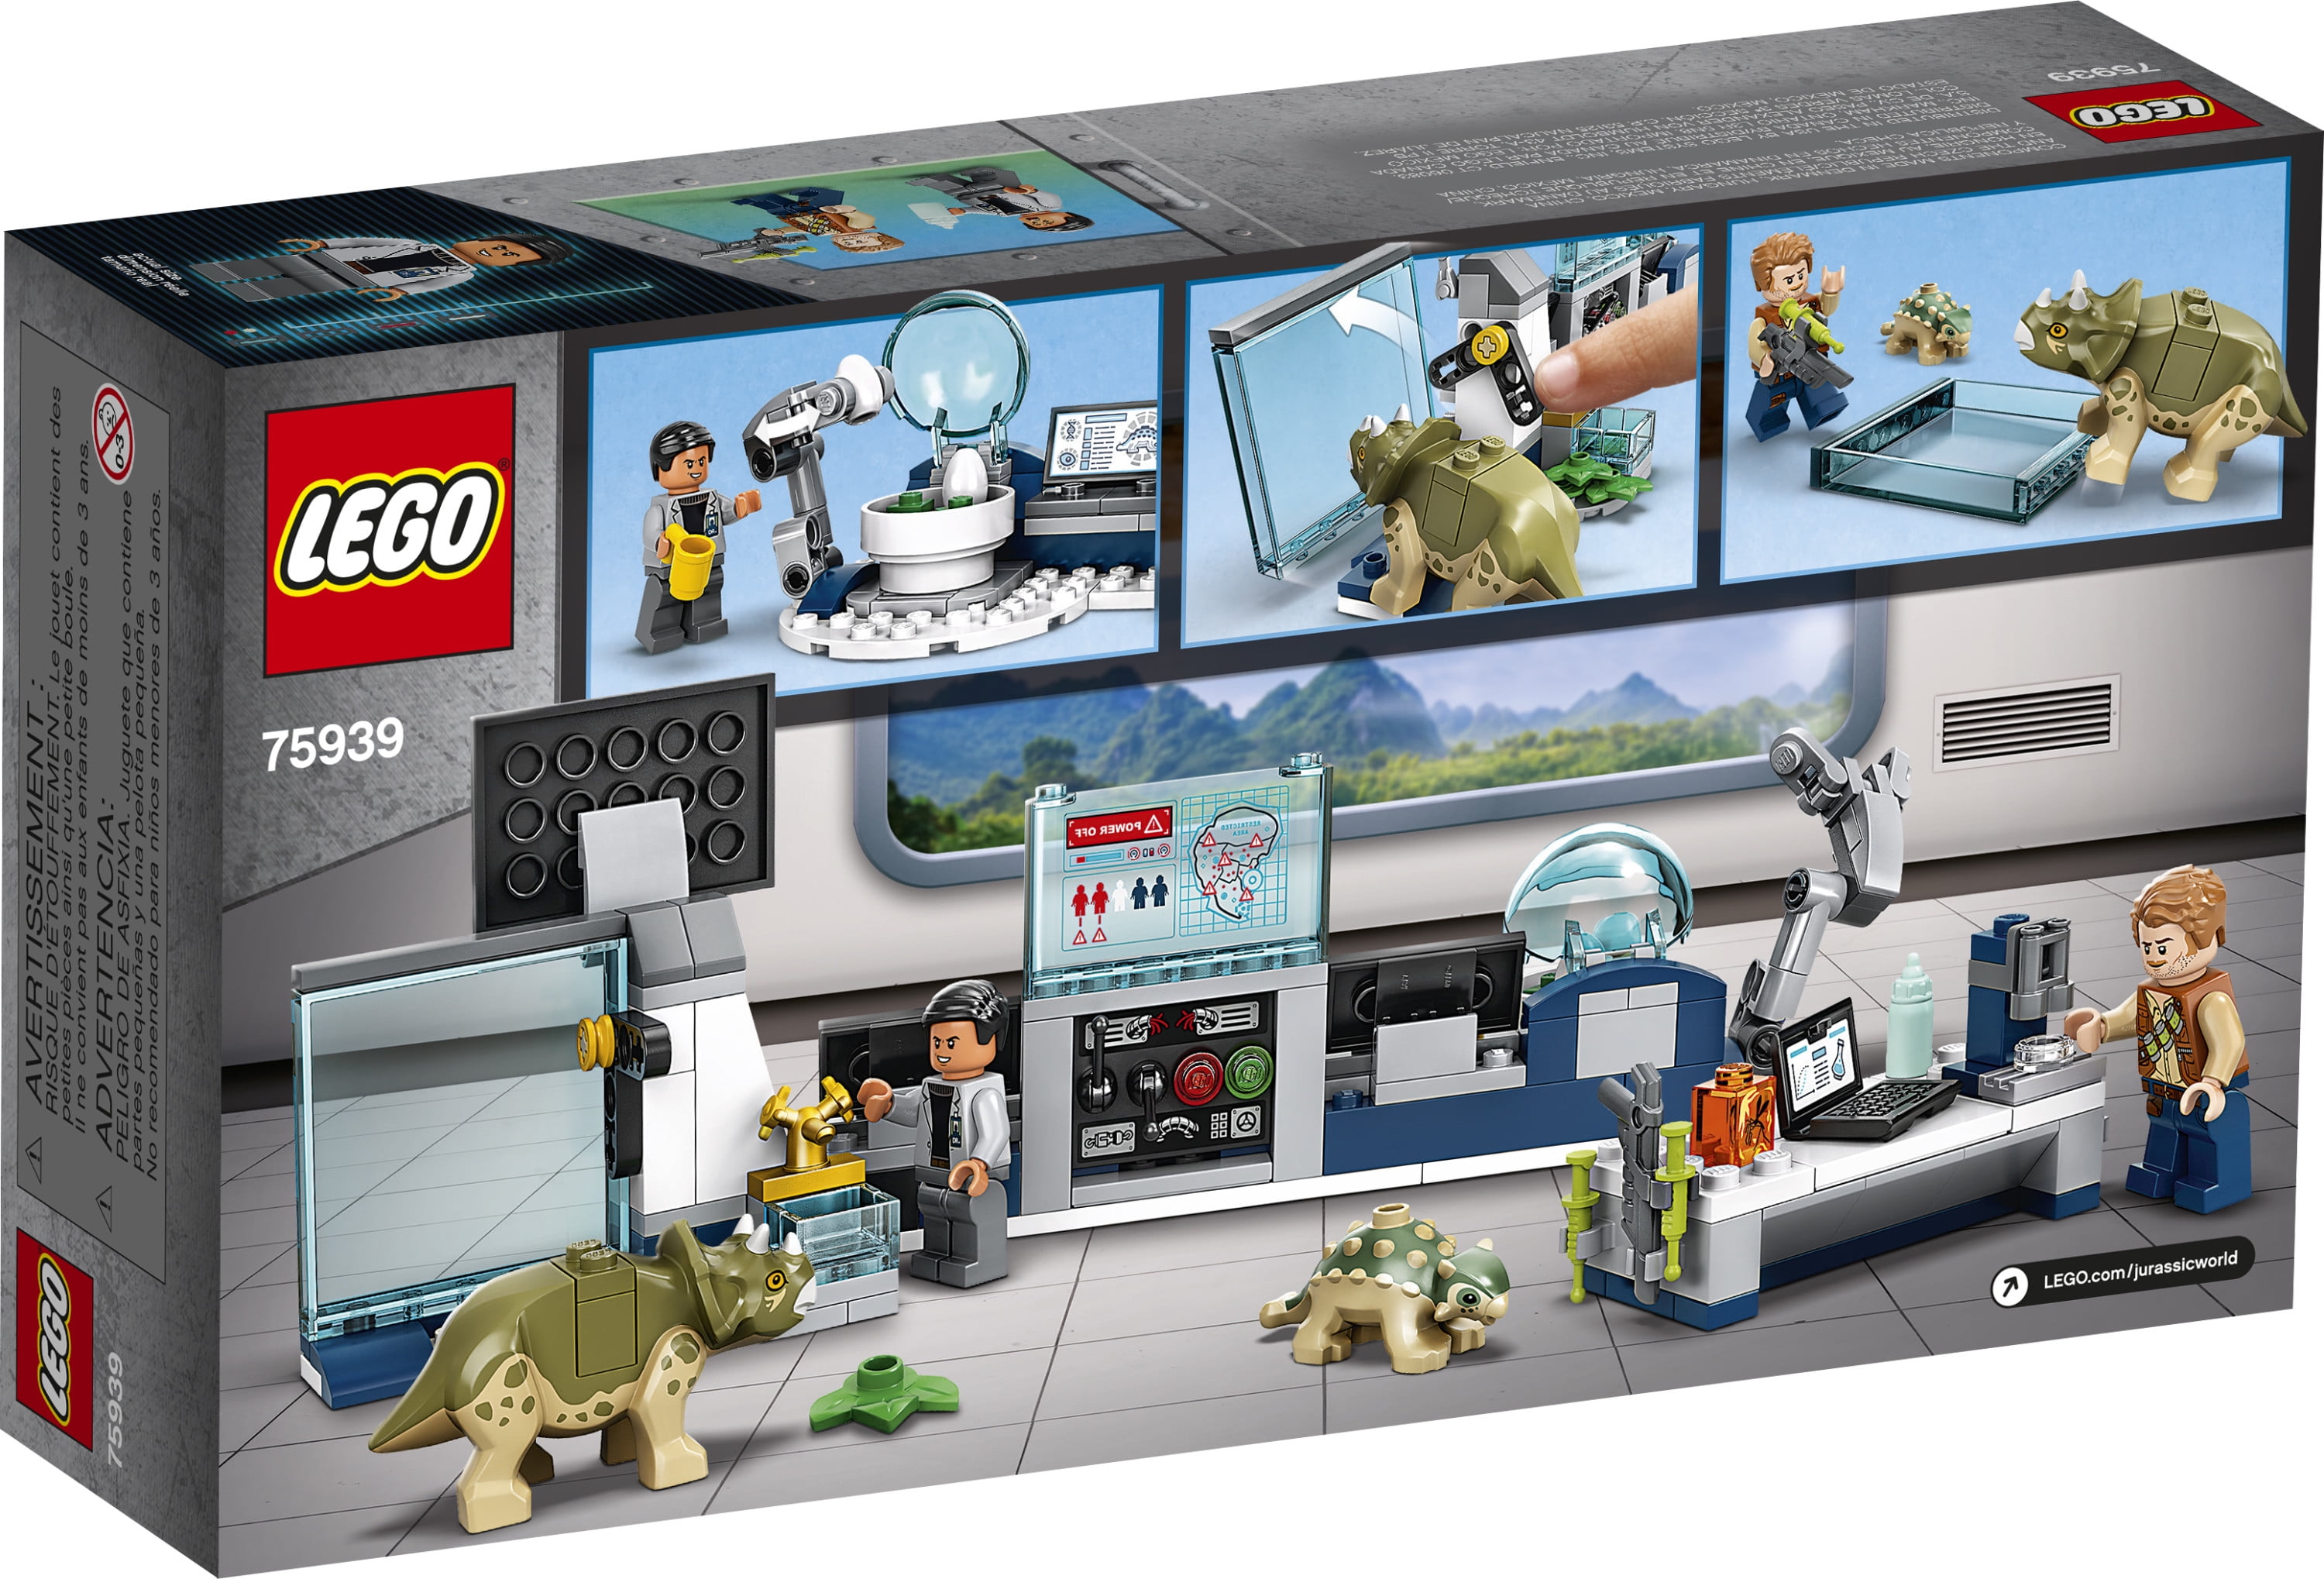 LEGO Jurassic World Dr. Wu's Lab: Baby Dinosaurs Breakout 75939 Dinosaur Toy for Play (164 Pieces) -